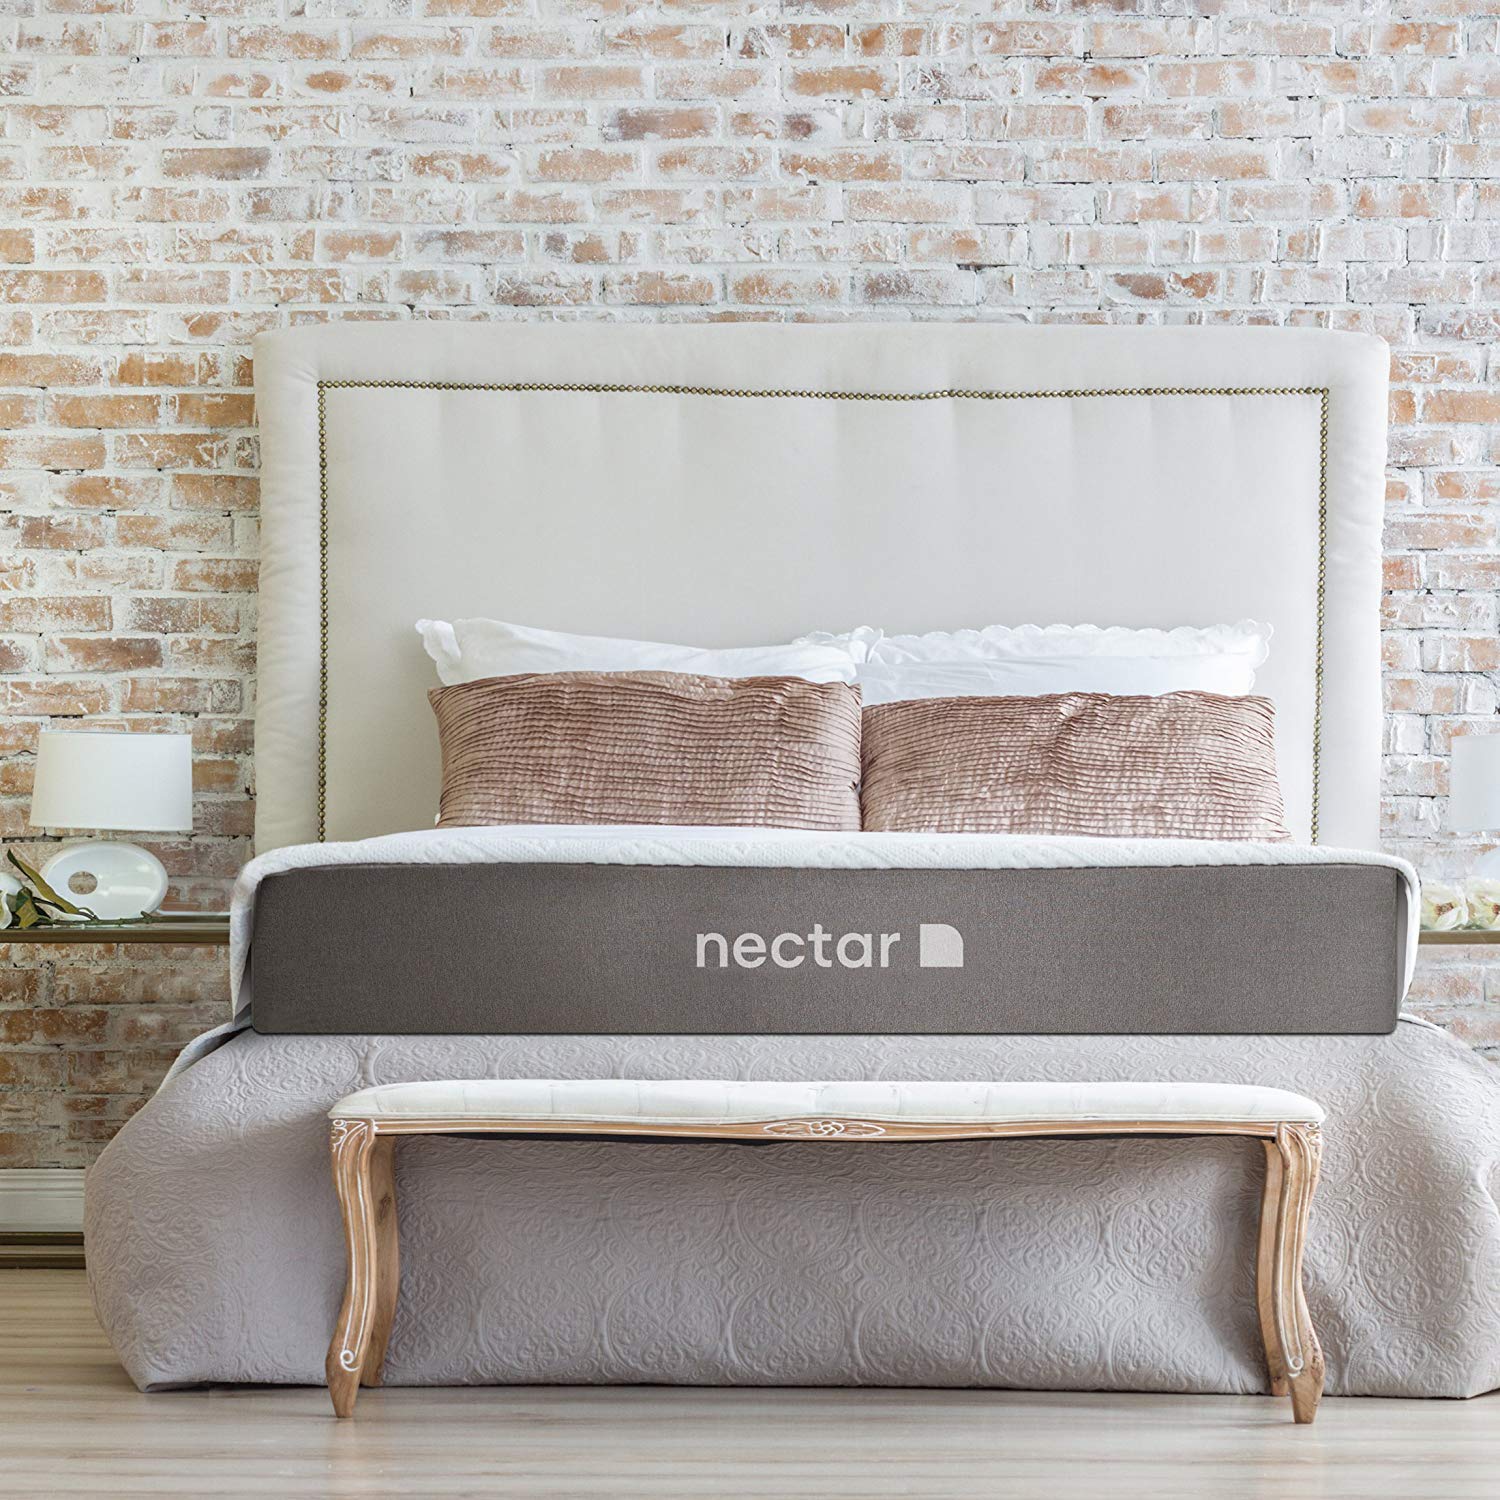 An image of Nectar Gel Memory Foam King-Size 11-Inch Thick Mattress